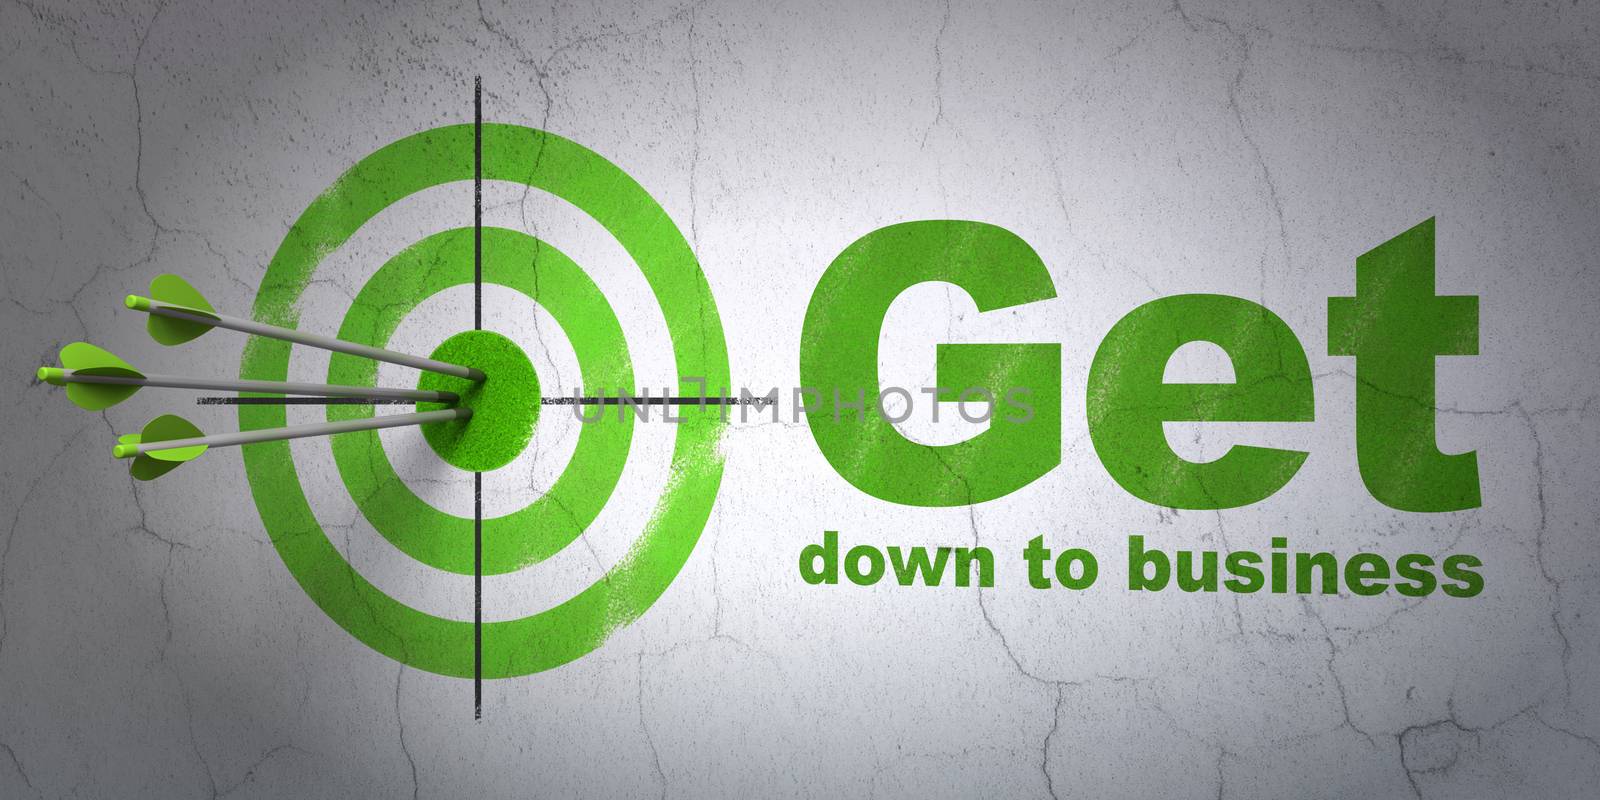 Success finance concept: arrows hitting the center of target, Green Get Down to business on wall background, 3D rendering